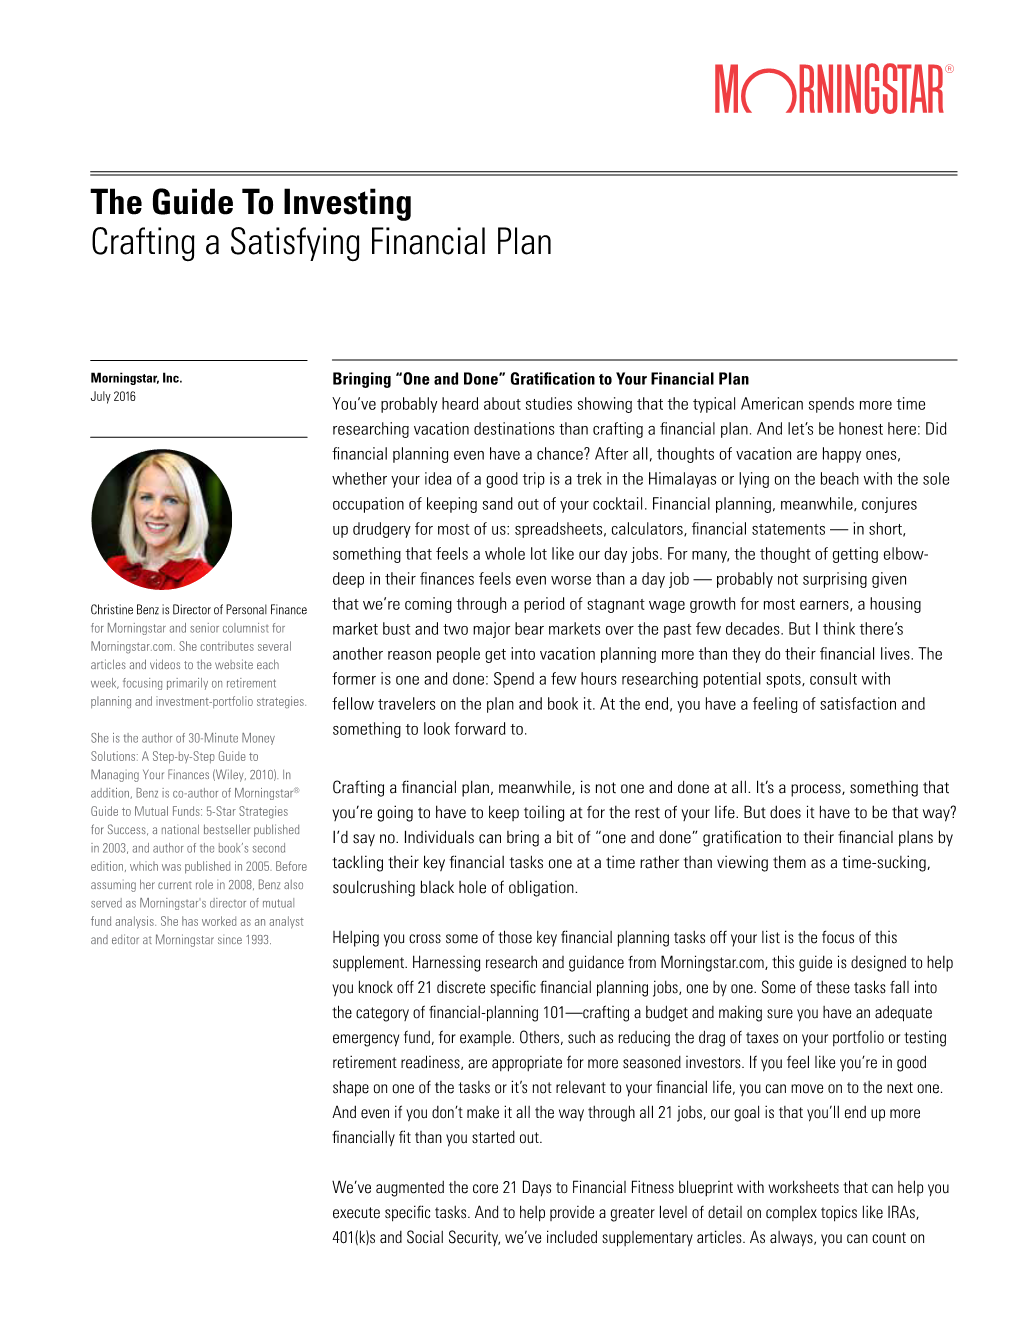 The Guide to Investing Crafting a Satisfying Financial Plan